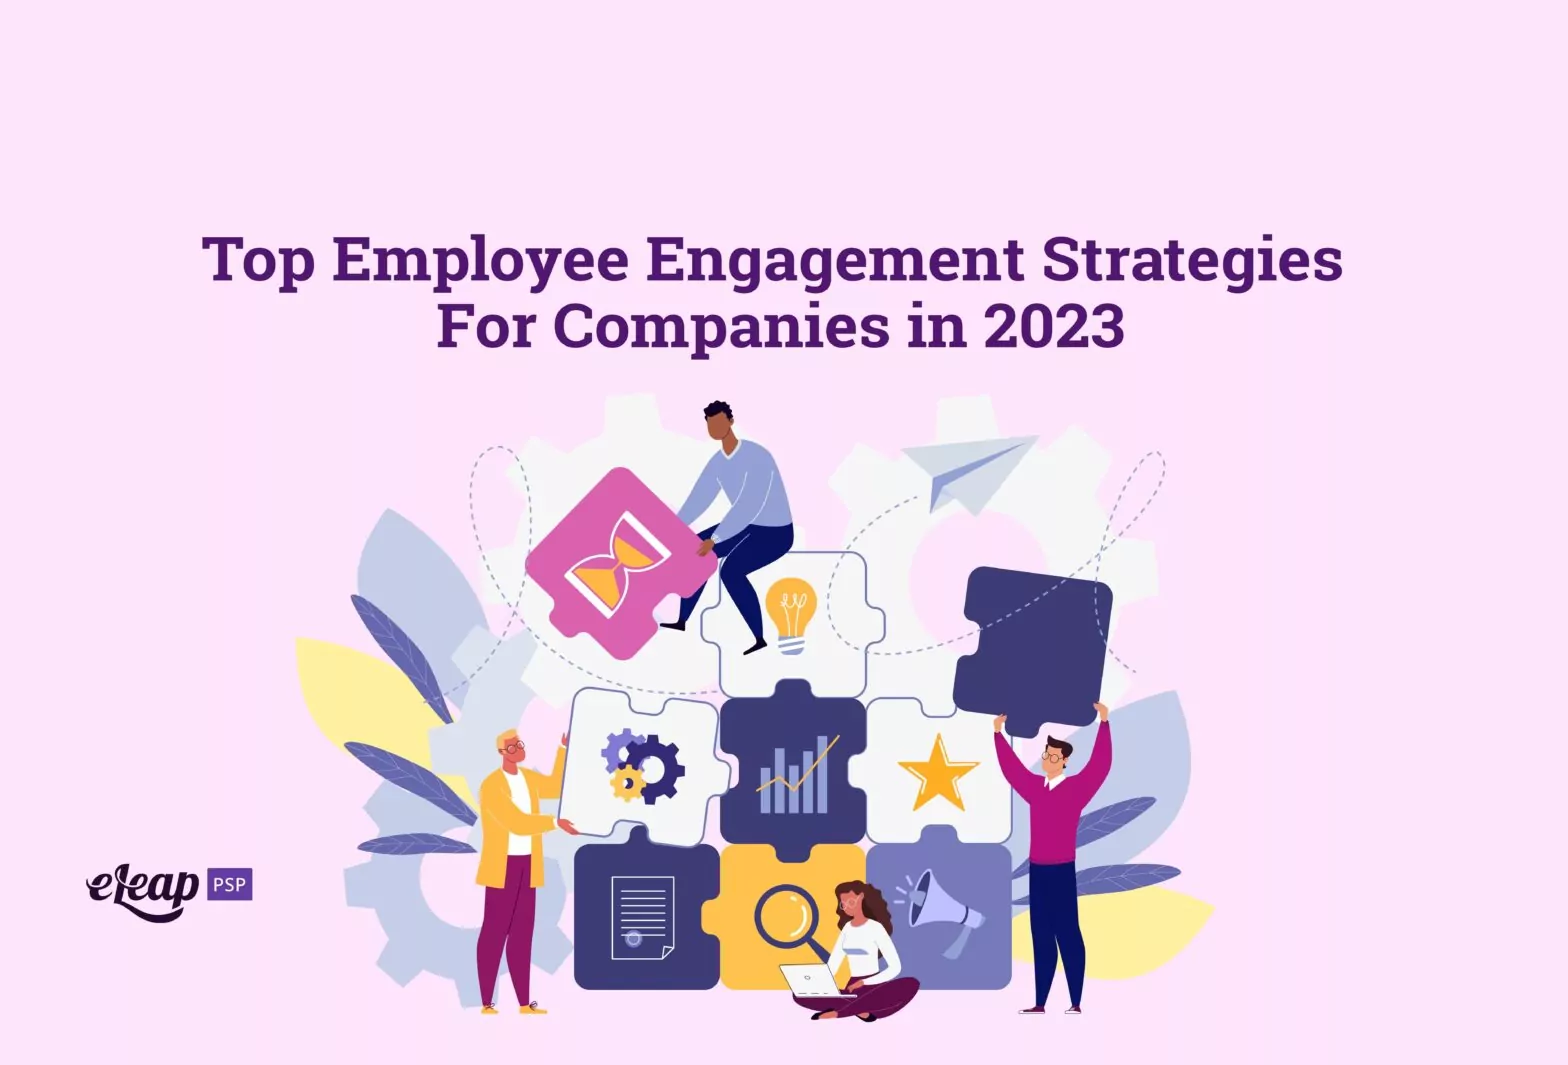 Top Employee Engagement Strategies For Companies in 2023